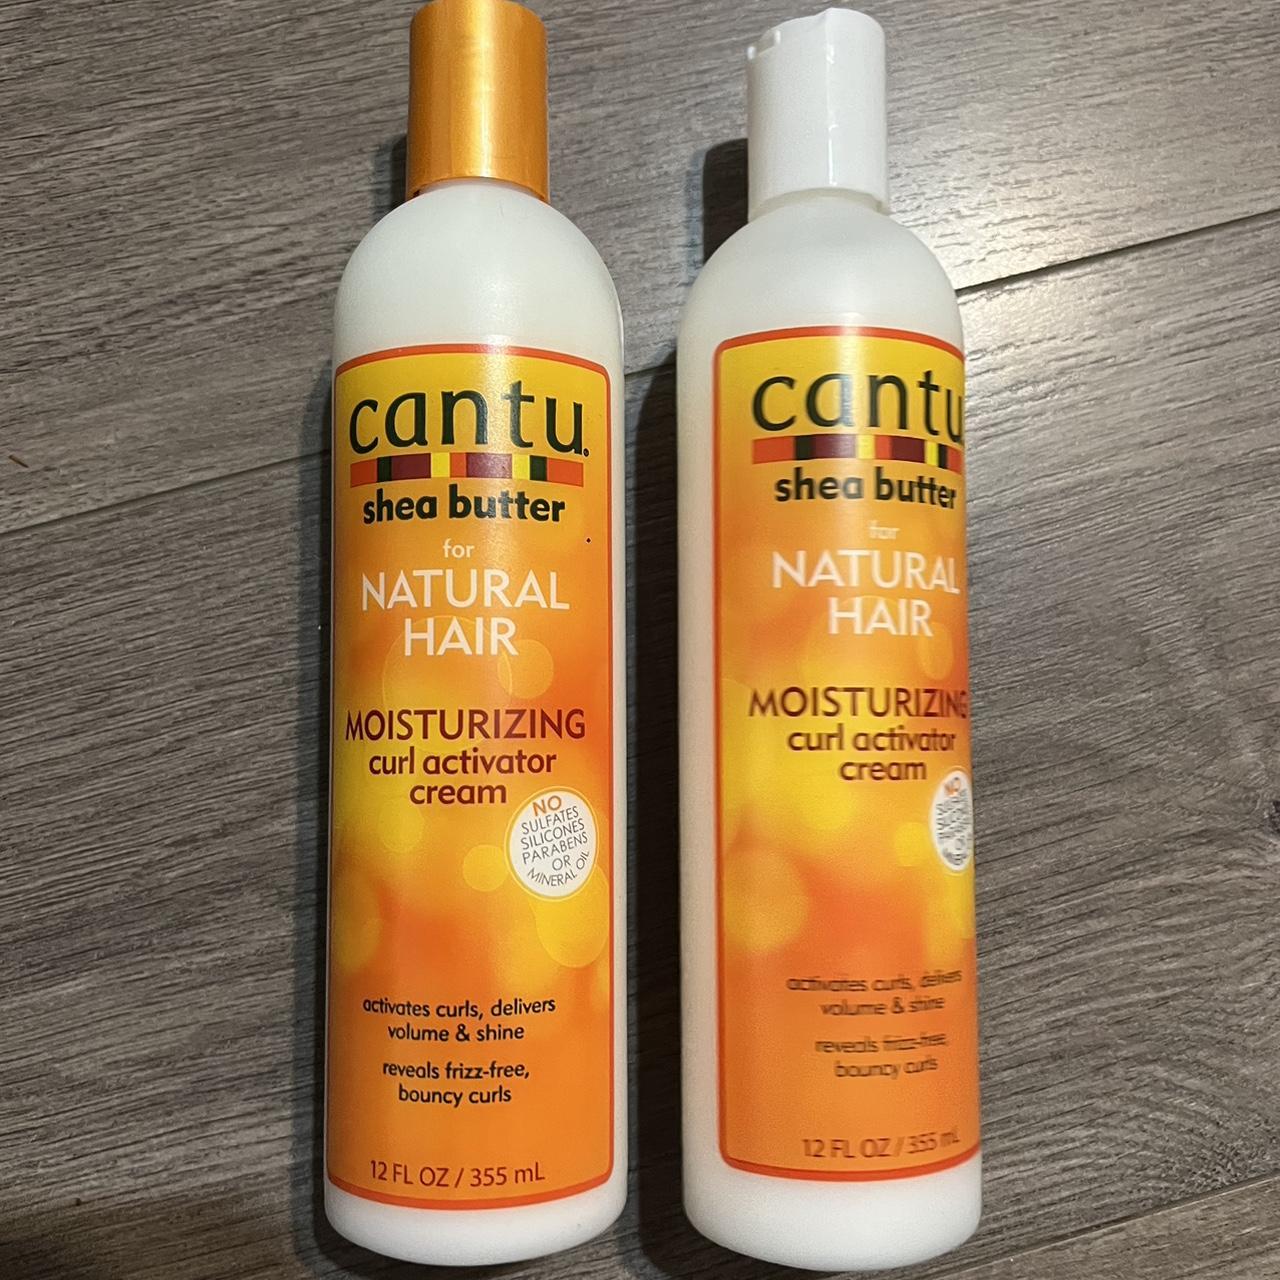 Cantu White and Orange Hair-products